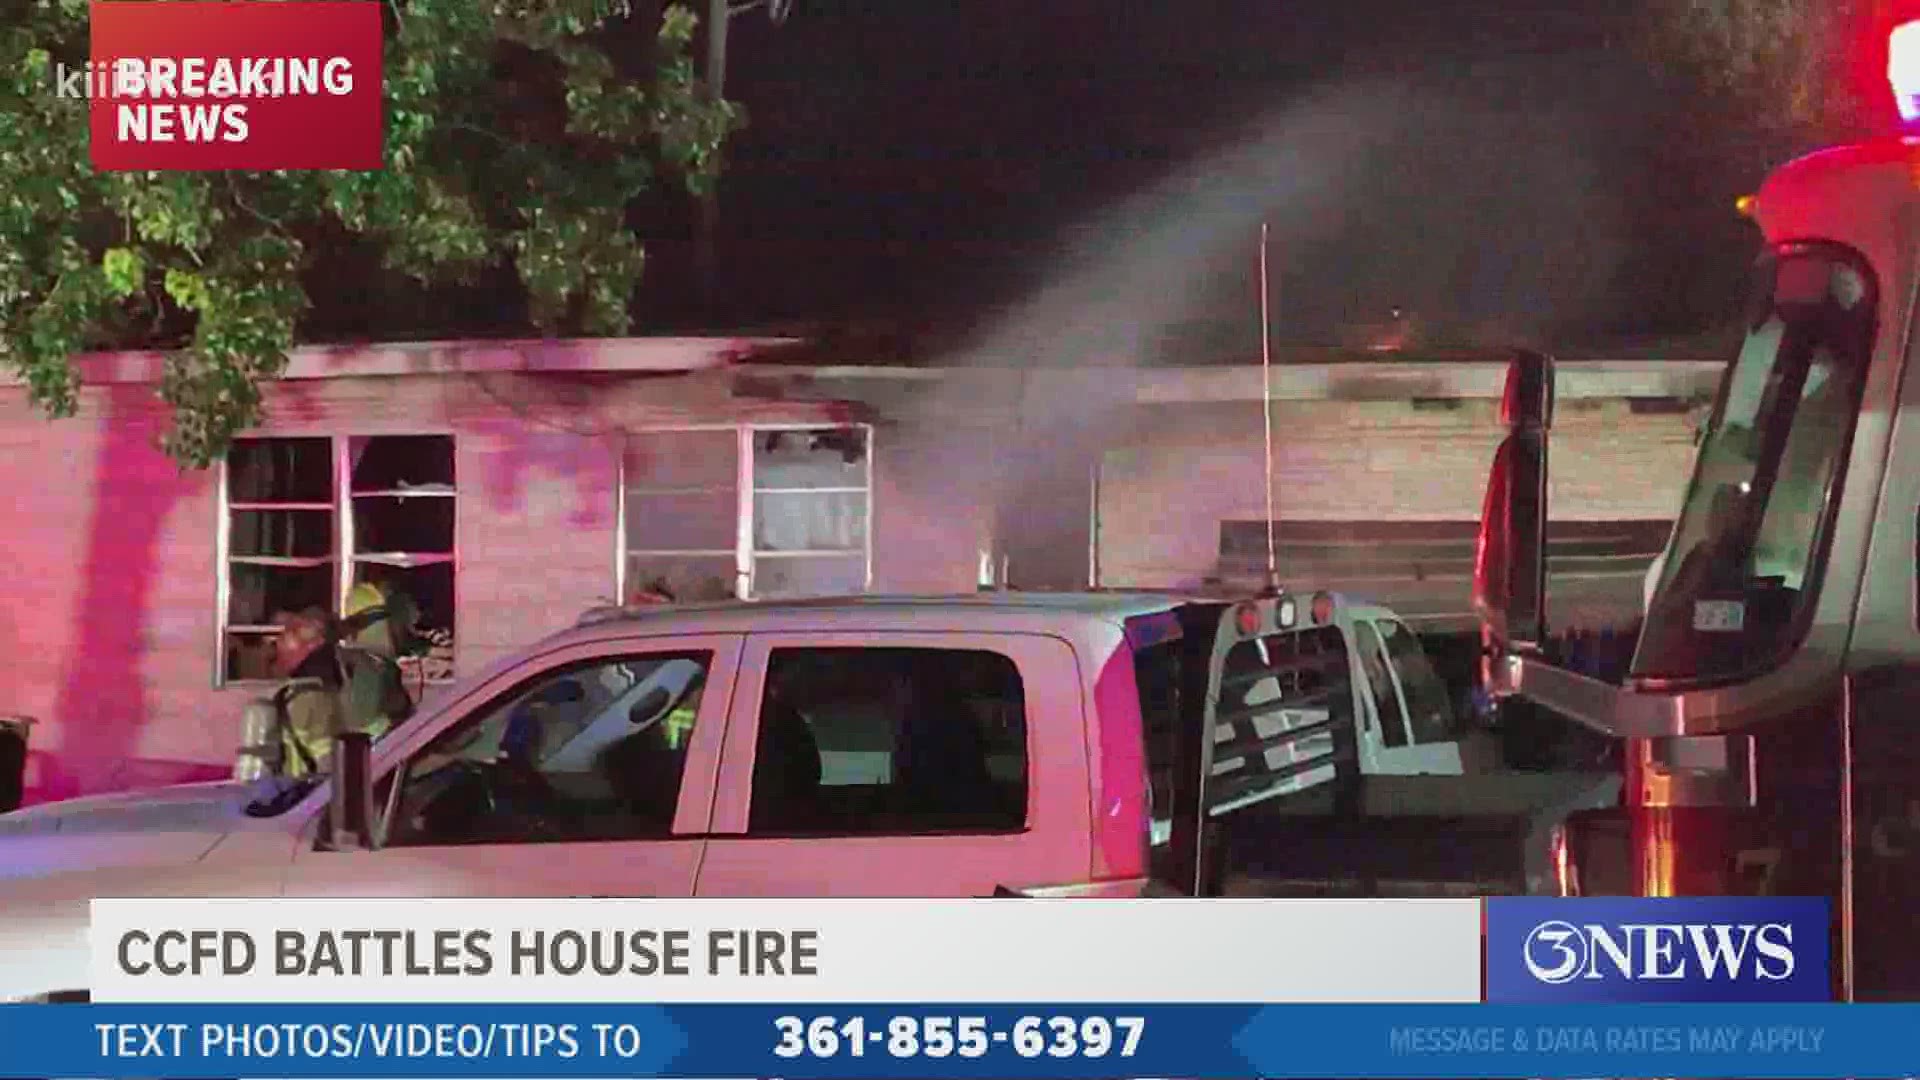 Firefighters with the Corpus Christi Fire Department are battling a house fire on McArdle and Crescent.